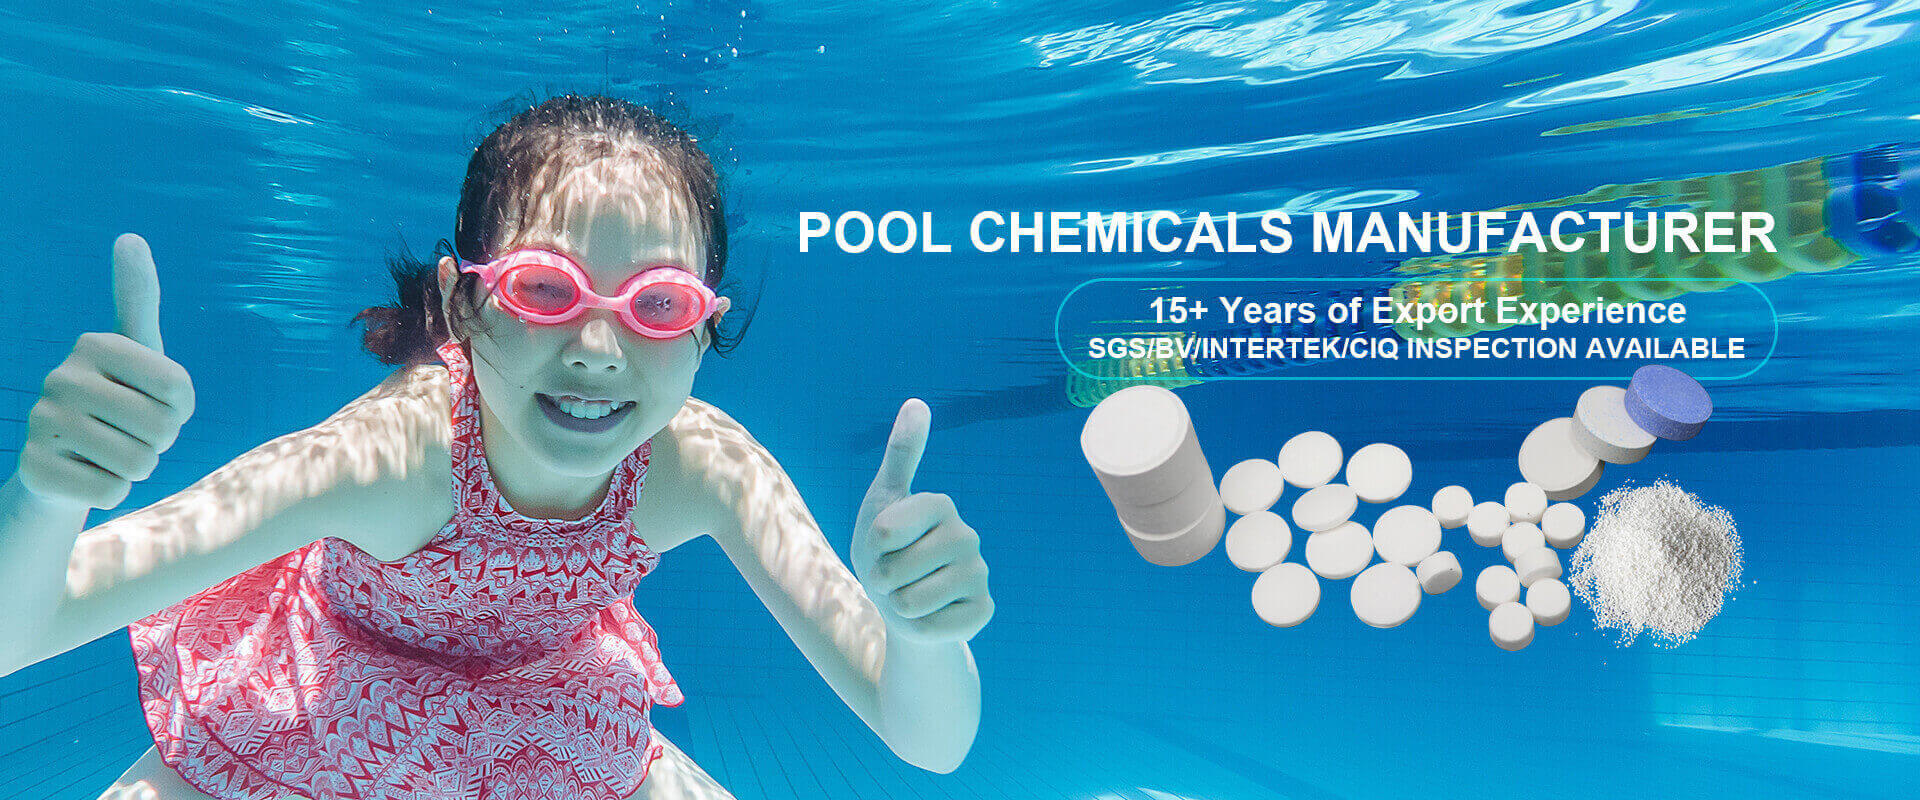 Pool Chemicals Manufacture